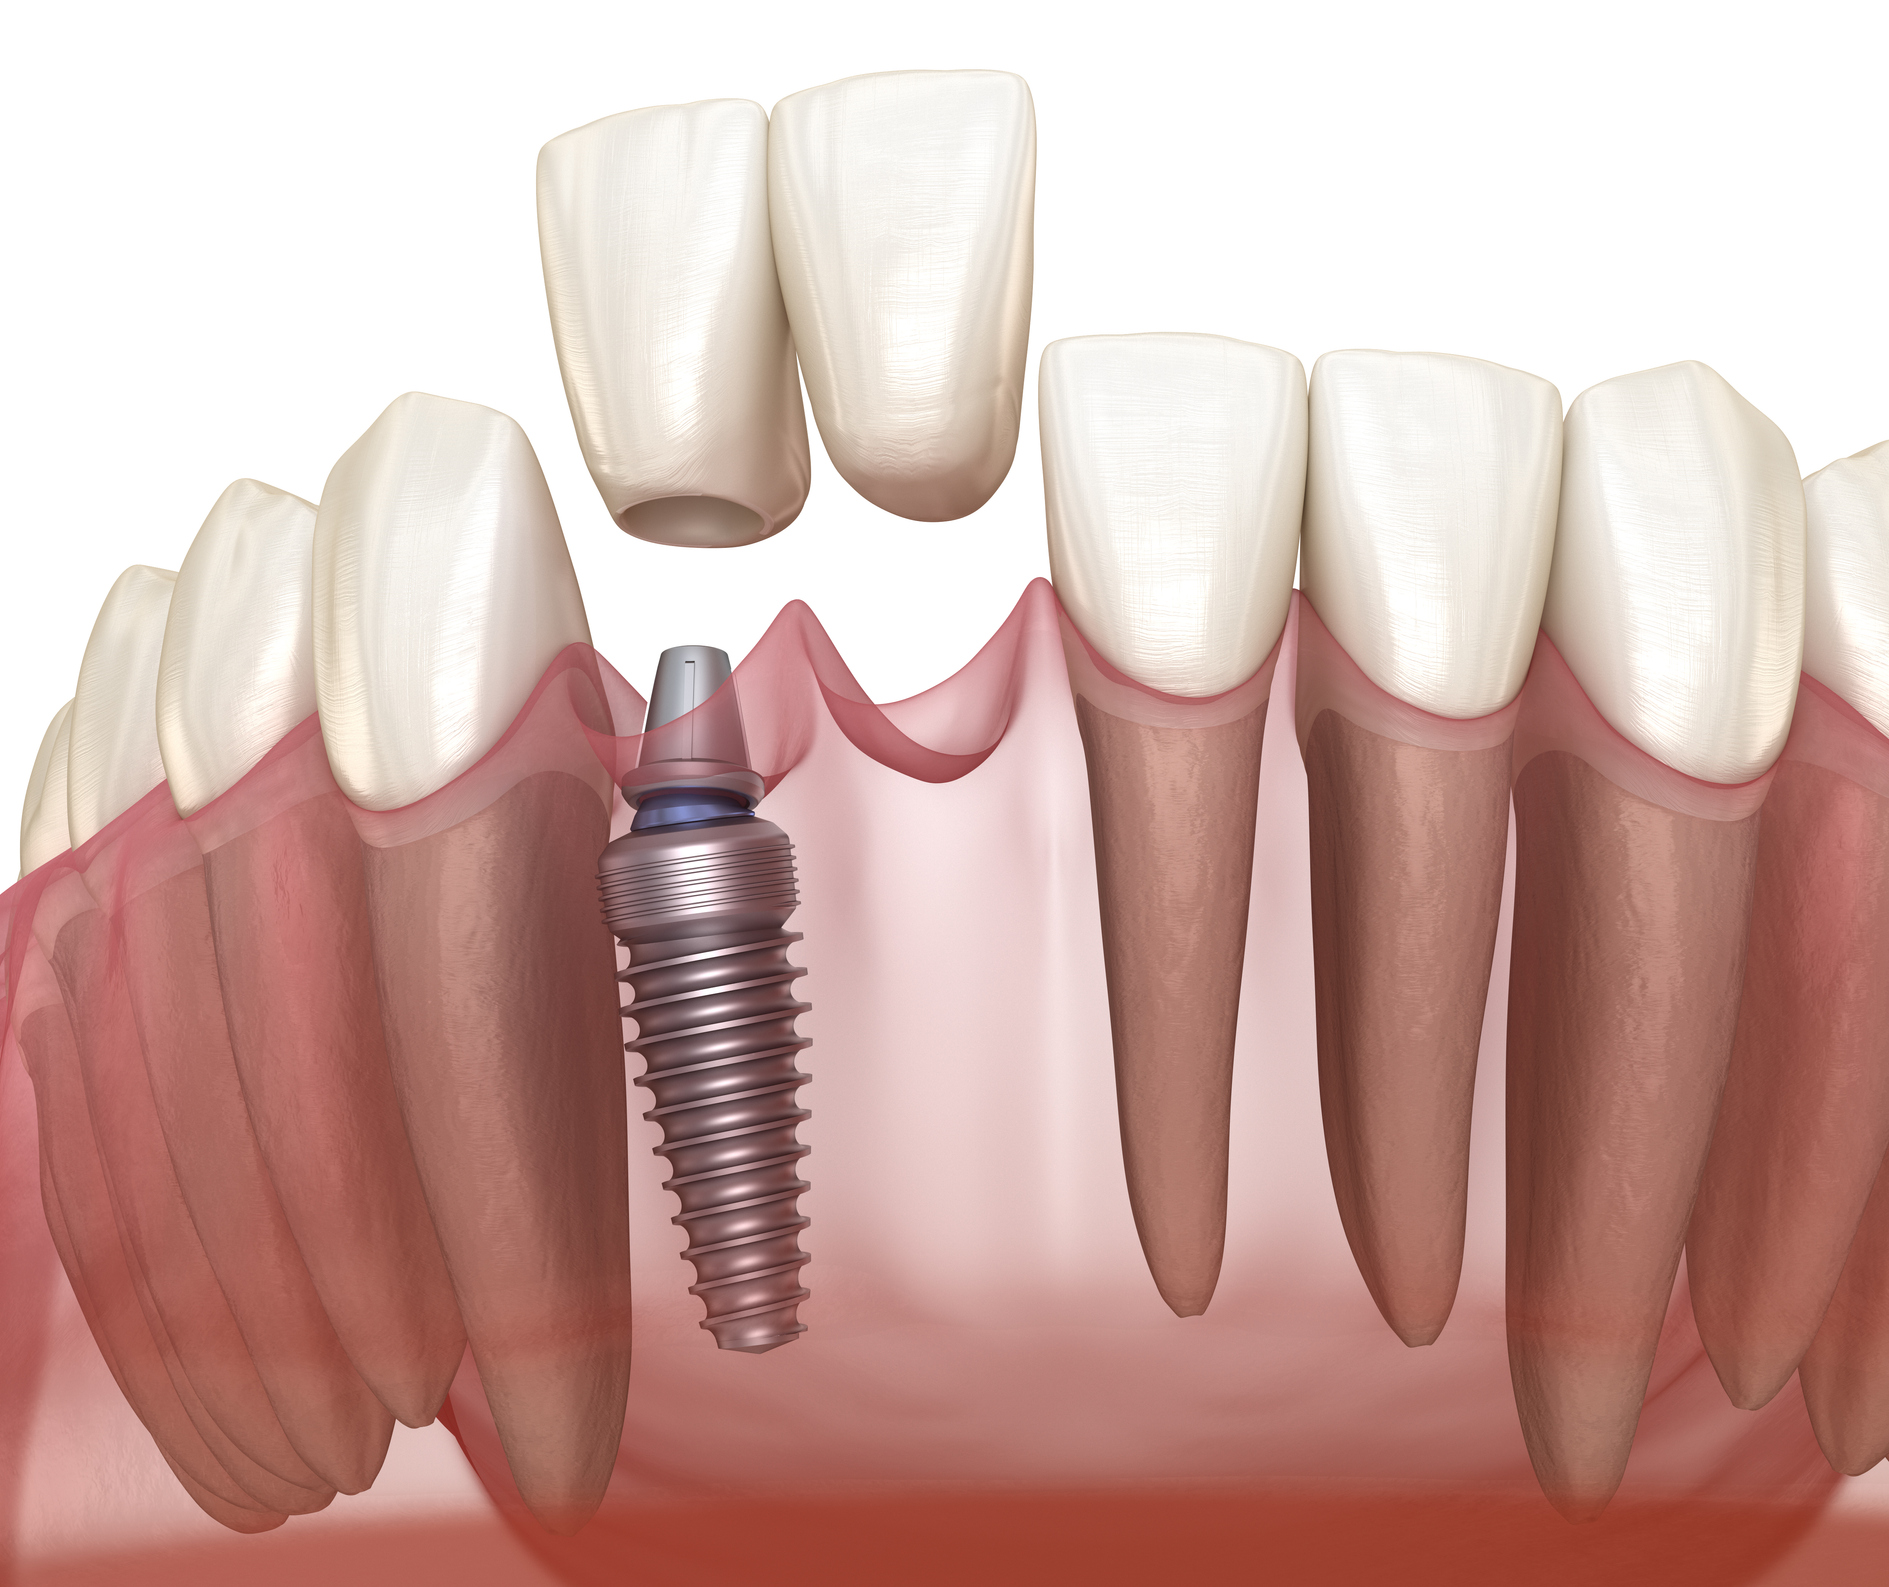 Front teeth dental implants provide a permanent and aesthetically pleasing solution for replacing missing front teeth.